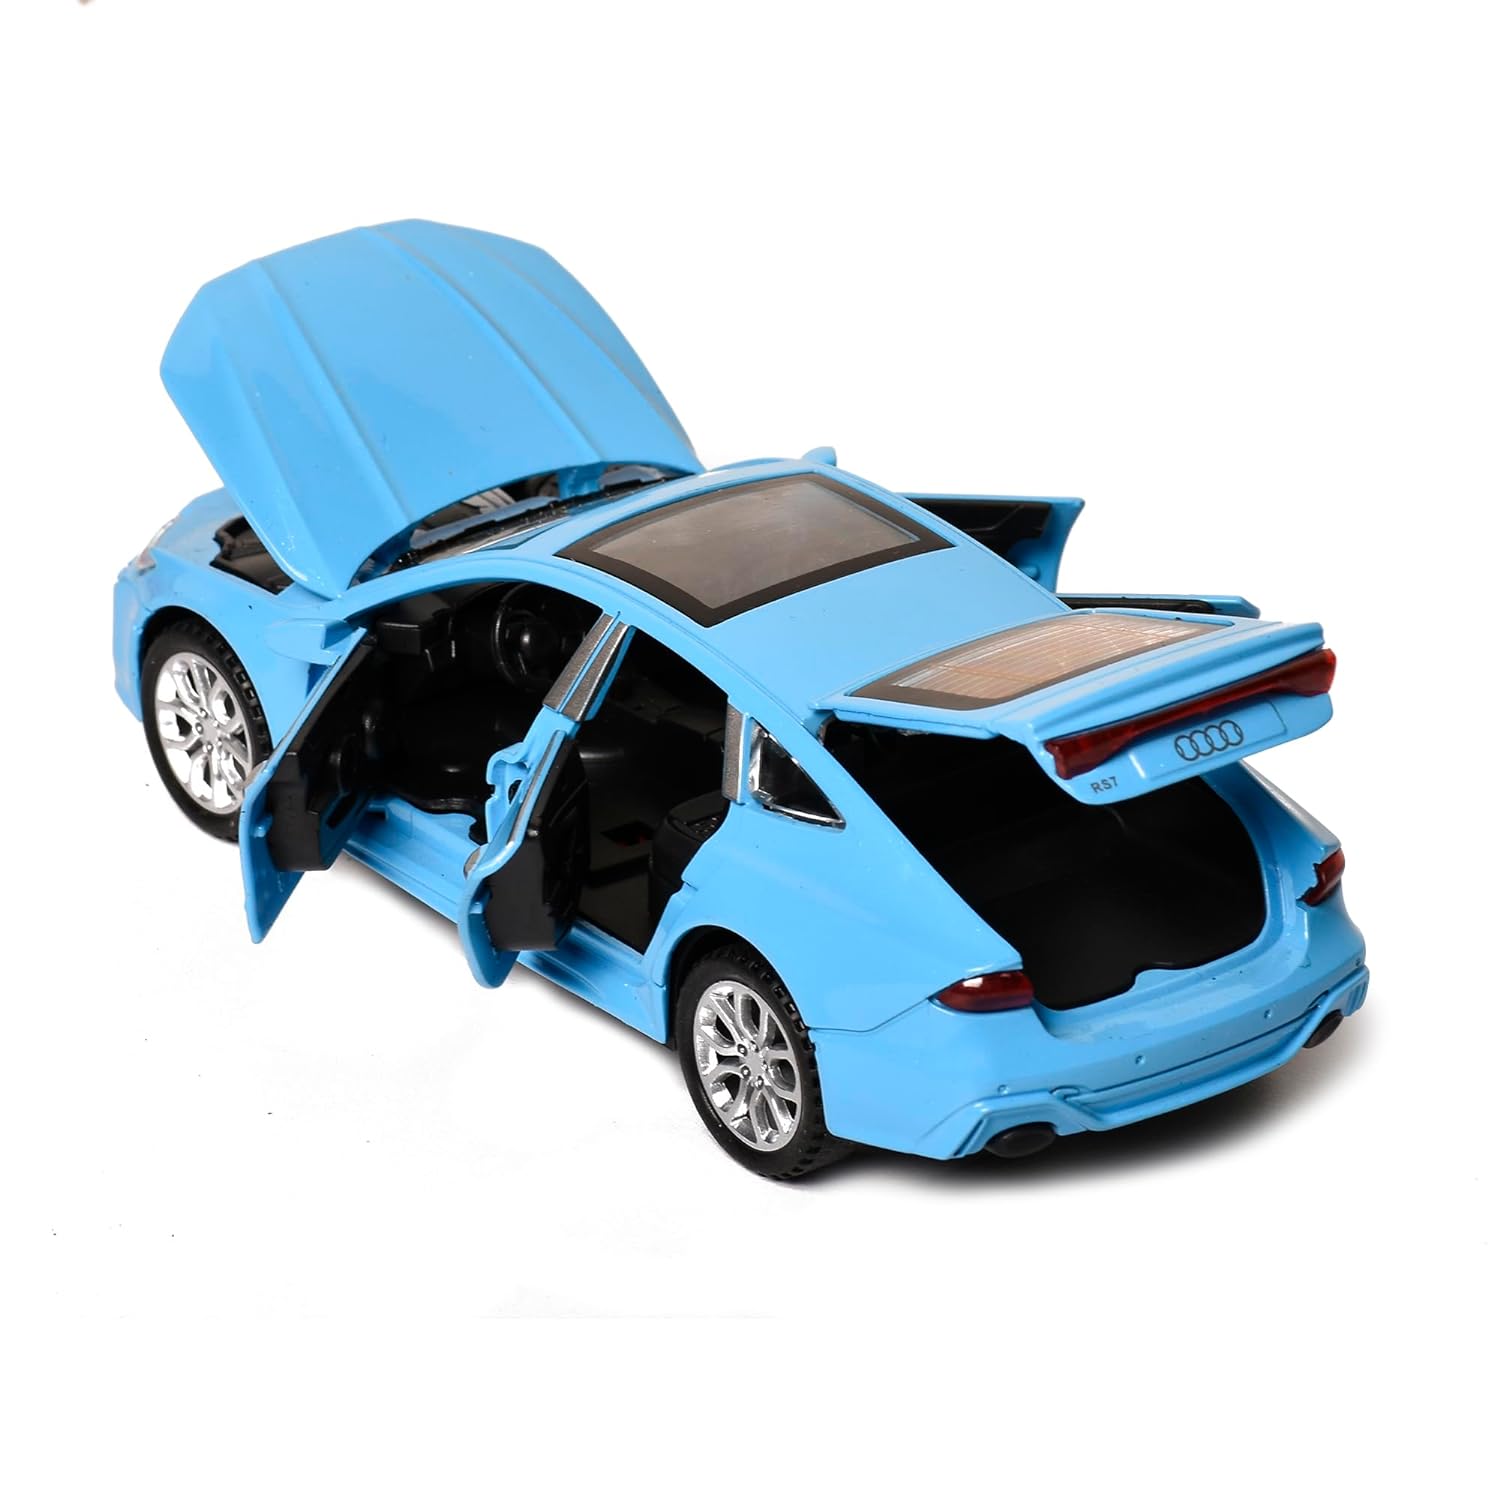 Braintastic Model Diecast Car Toy Vehicle Pull Back Friction Car with Openable Doors Light & Music Toys for Kids Age 3+ Years (AK Metal Series Audi Blue)